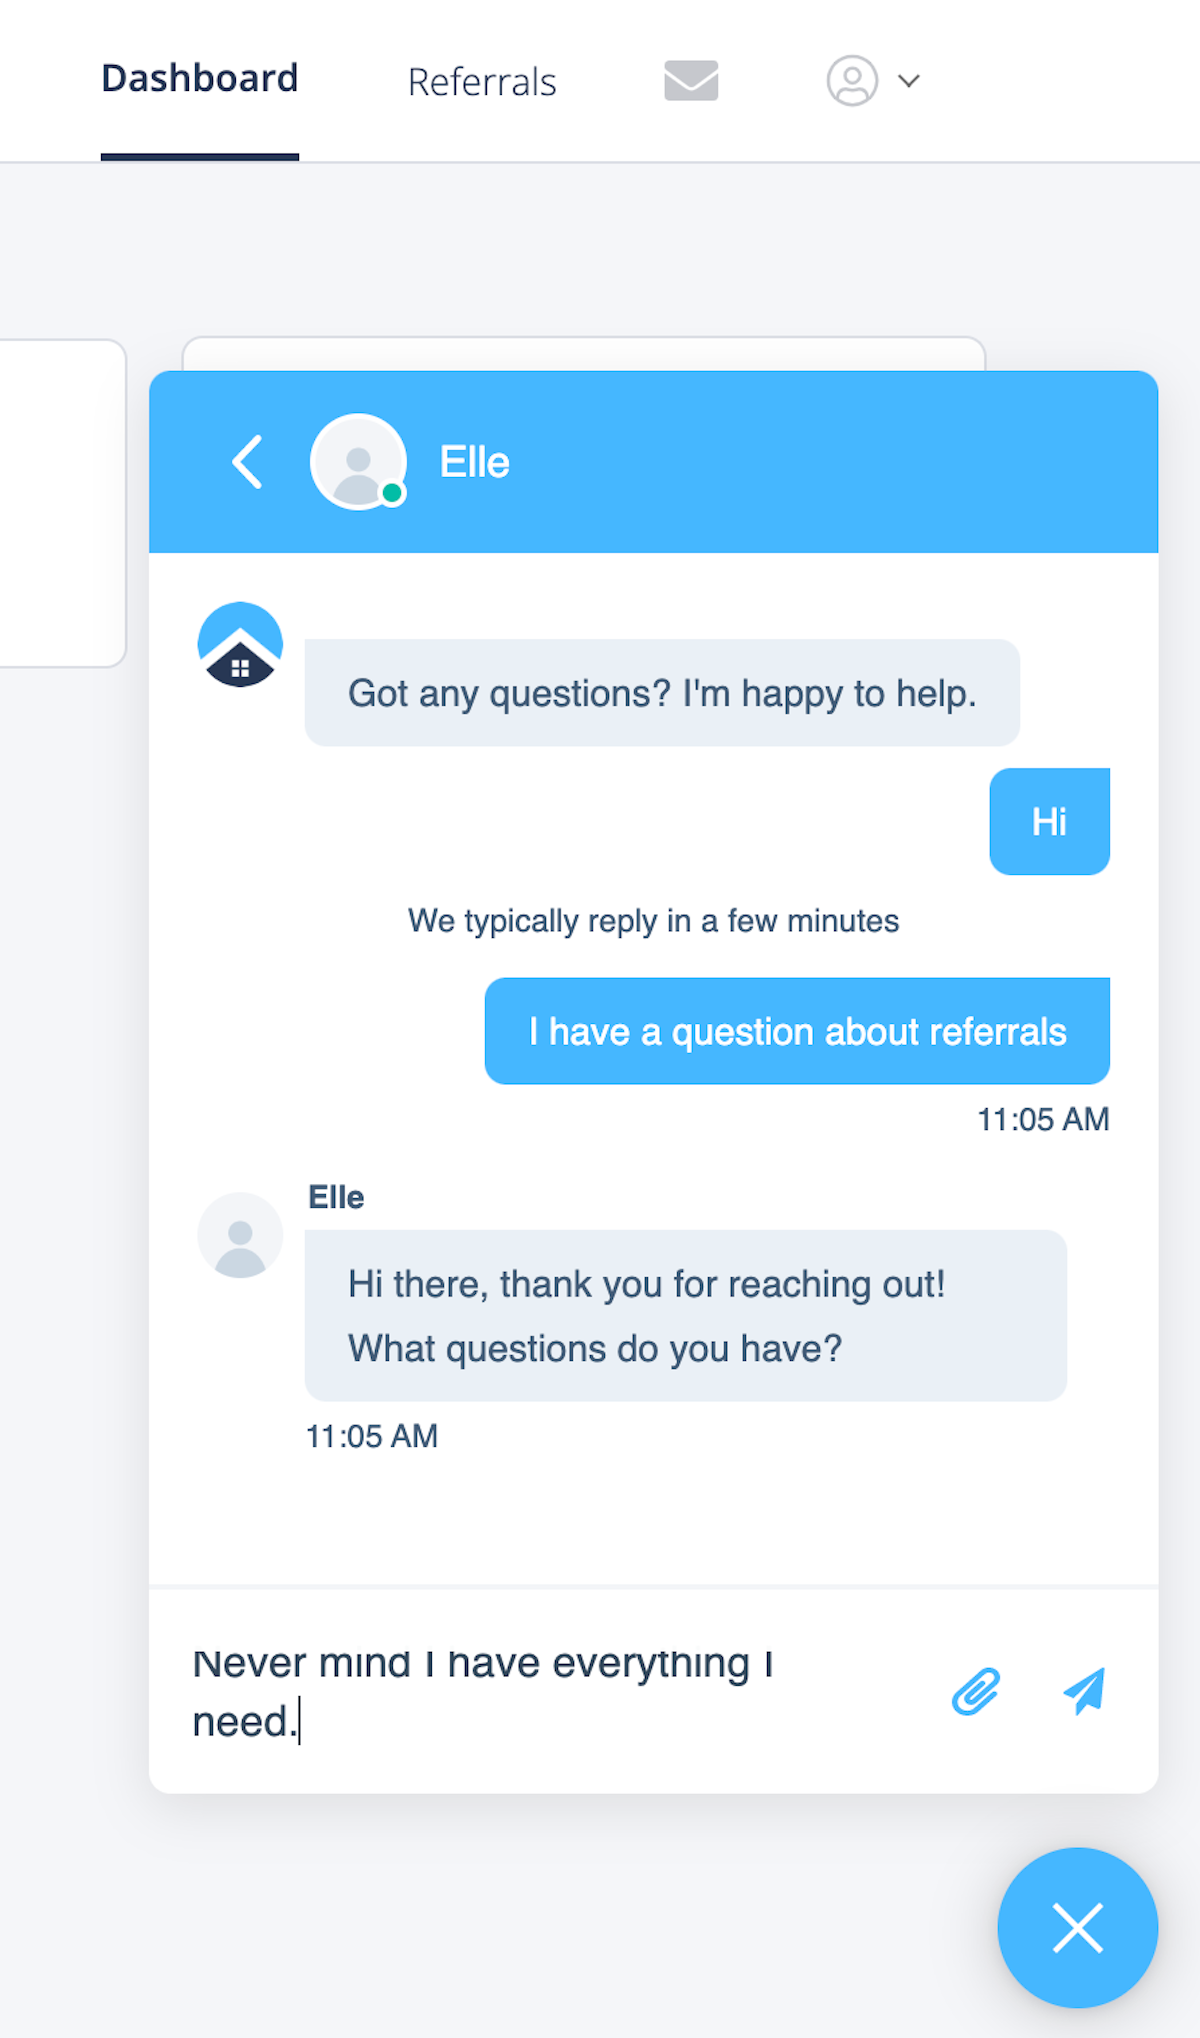 Once you chat in, you will get connected with one of our support team members, live. They will be able to assist you with any questions regarding your account.